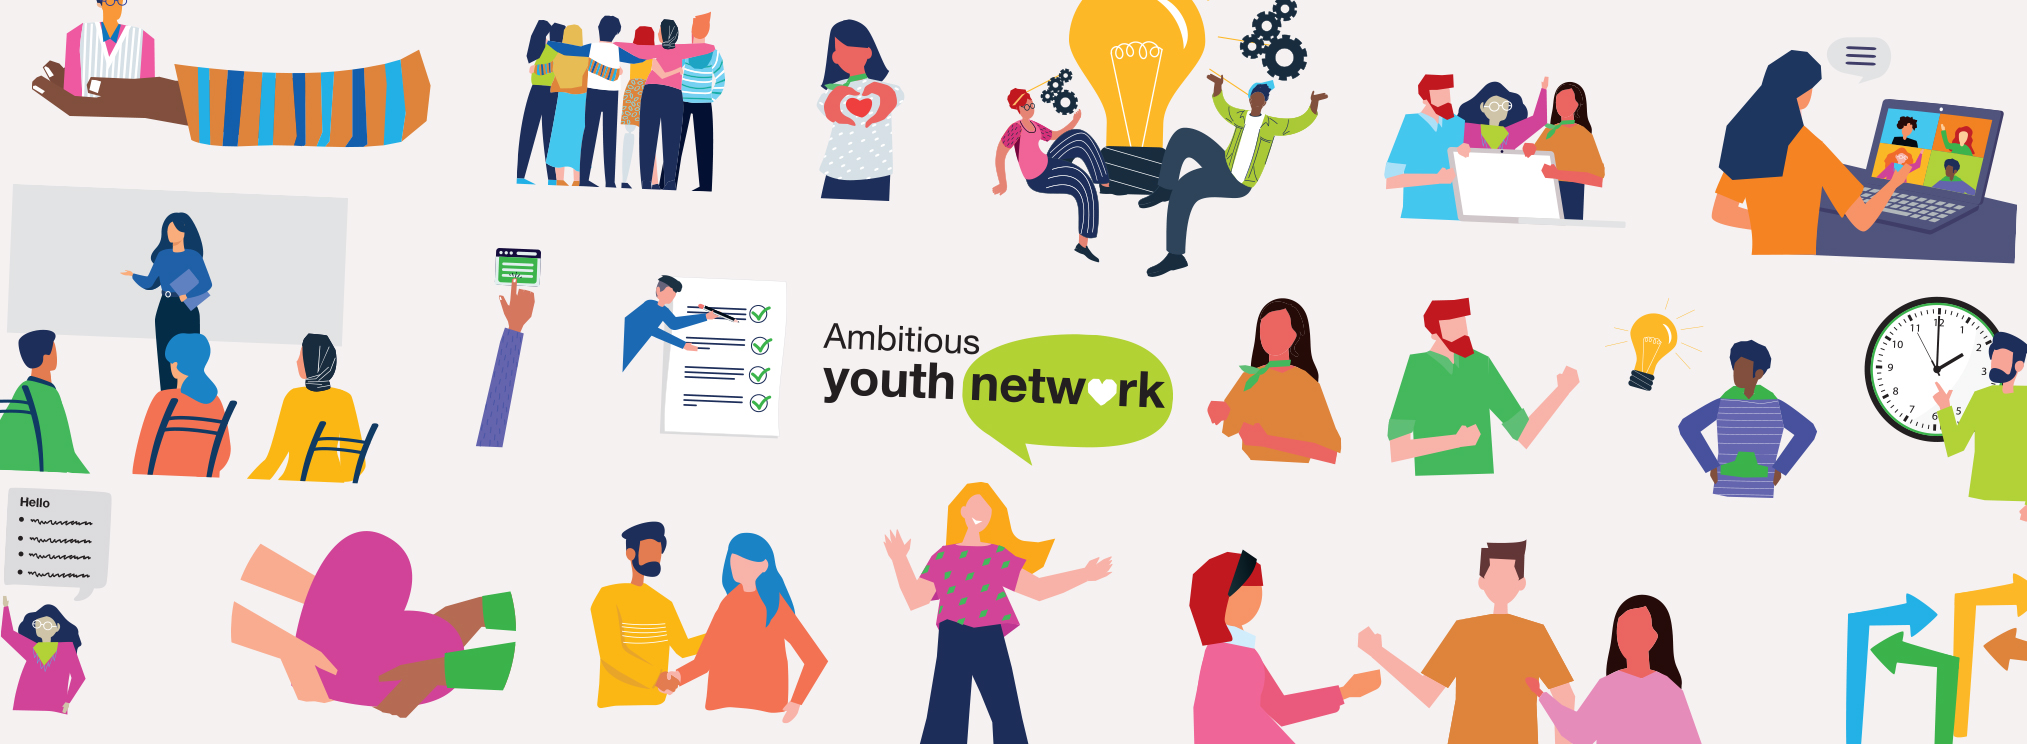 ambitious about autism - ambitious youth network